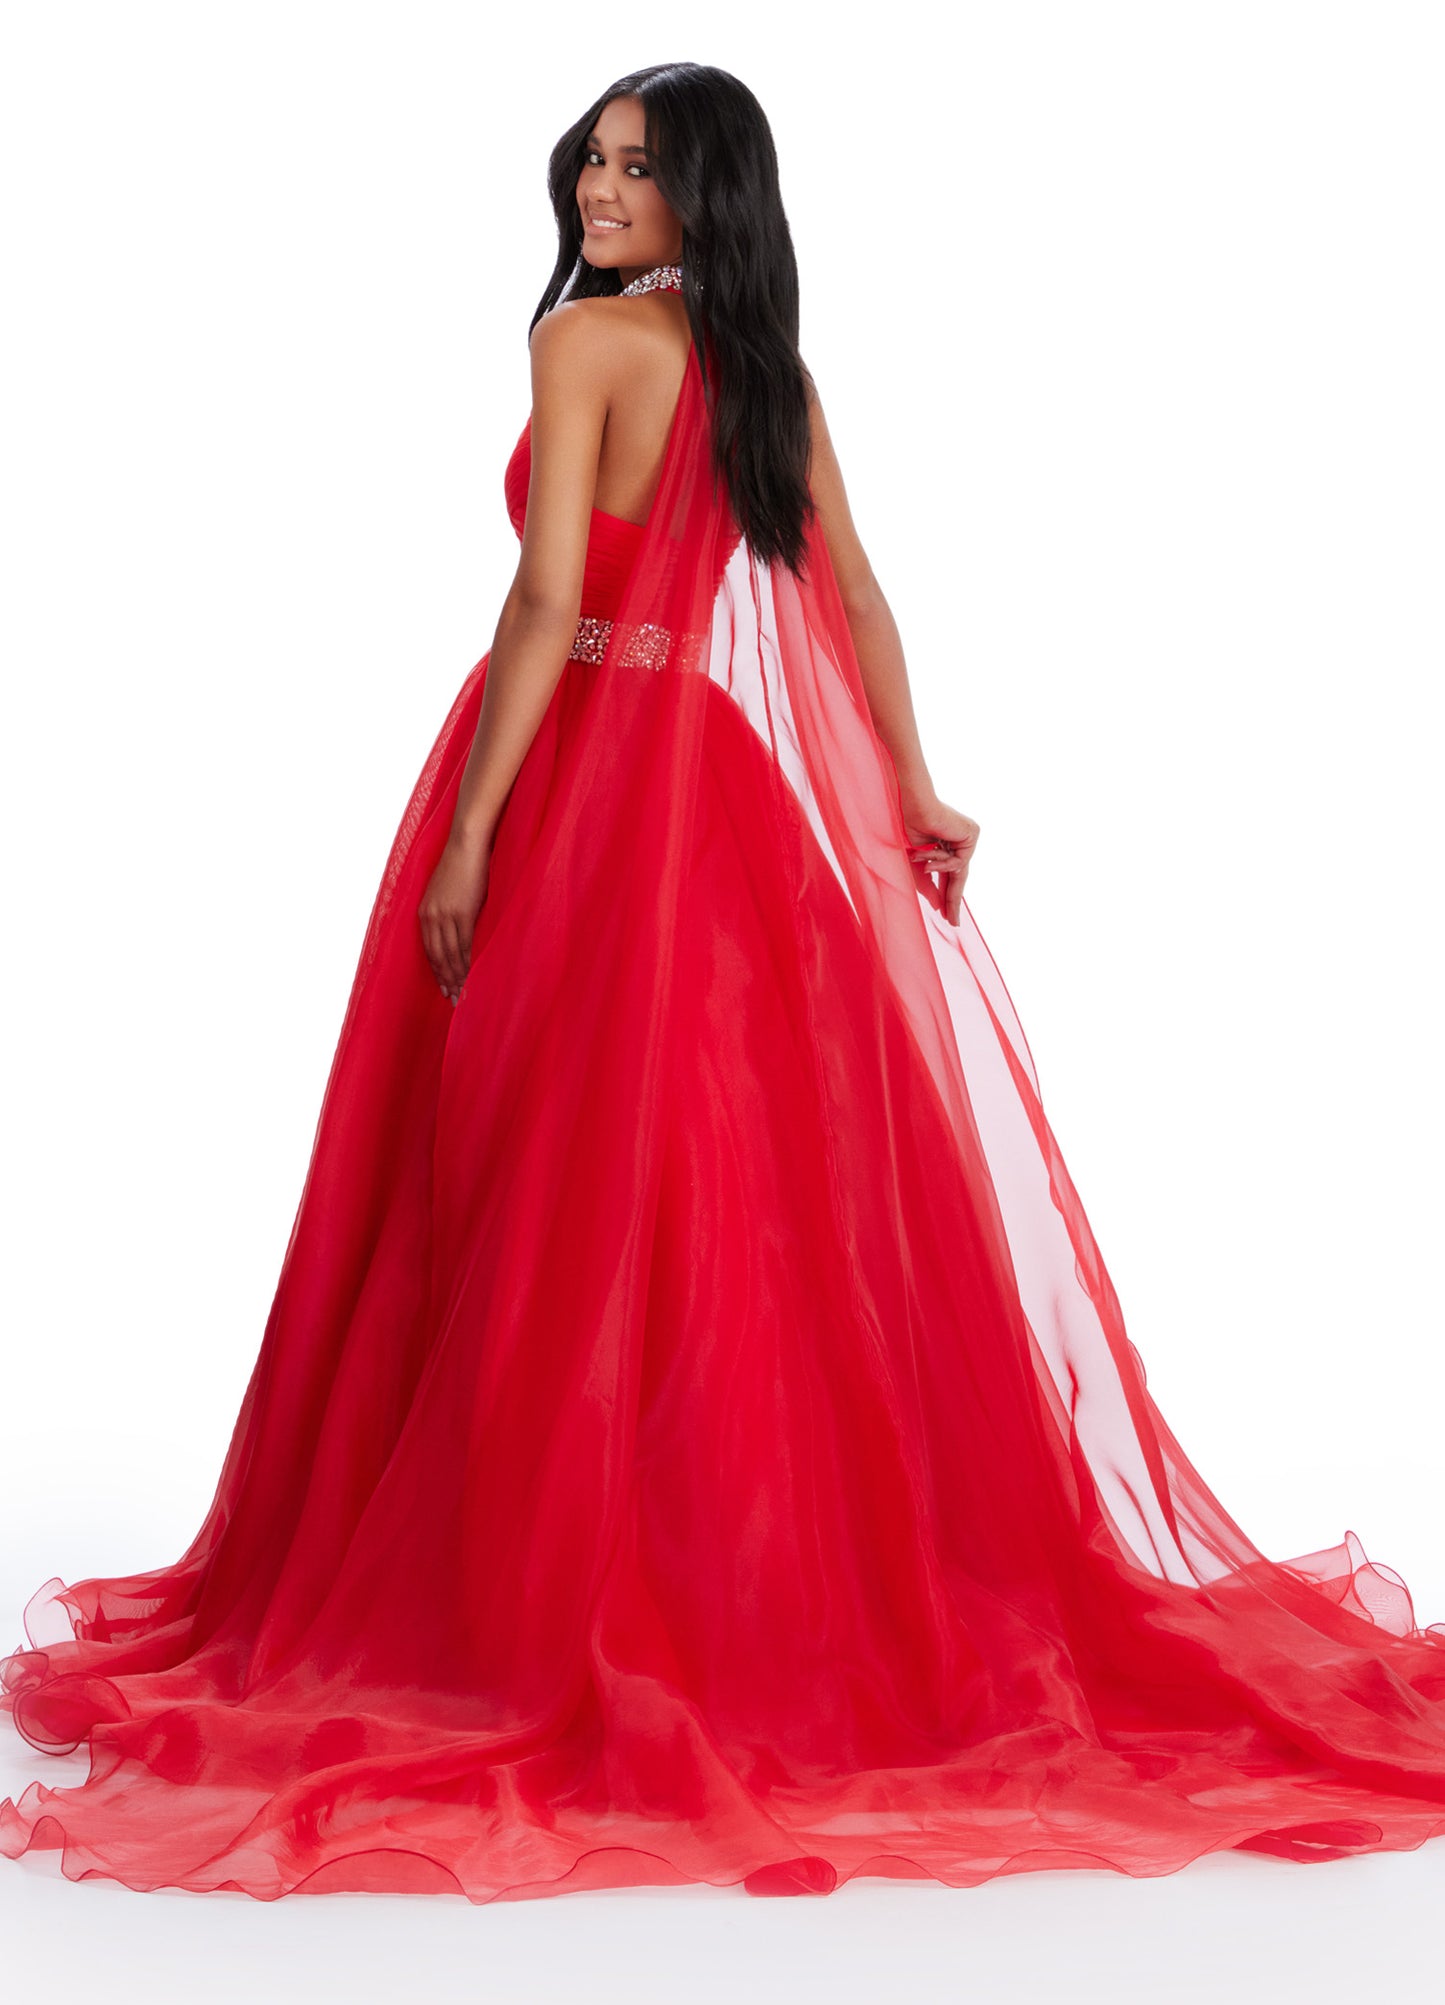 The Ashley Lauren 11565 Long Prom Dress is a stunning organza ball gown that features a beaded choker and a flowing cape, perfect for formal events or pageants. With its intricate beading and elegant design, this dress will make you feel like a true princess. A dress sure to make you feel like a queen. This strapless organza ball gown features a beaded waist band. The look is finished with a beaded choker and organza cape.